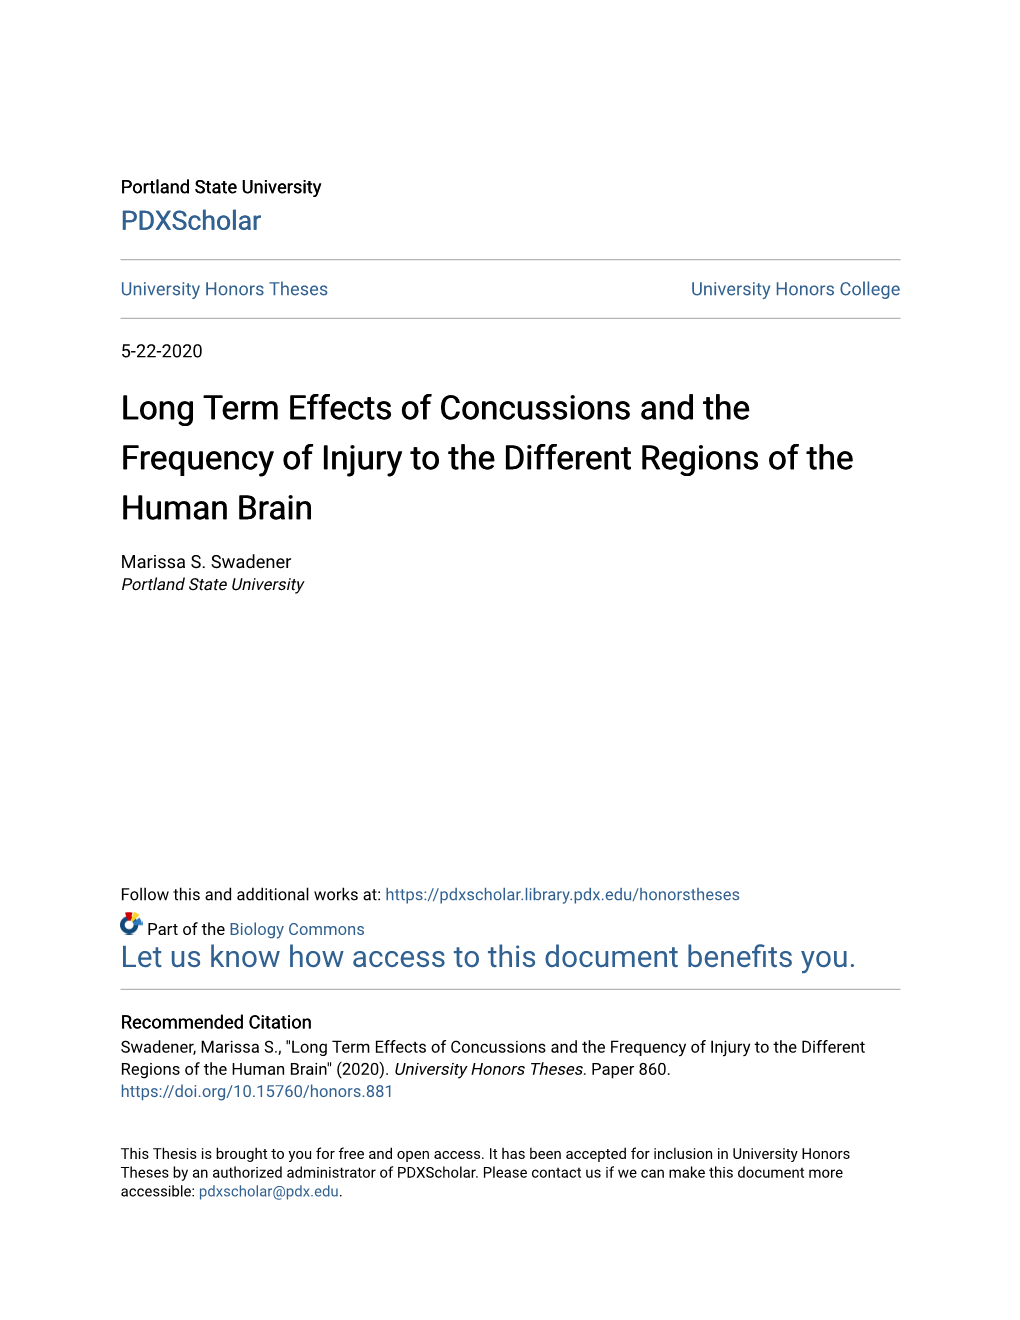 Long Term Effects of Concussions and the Frequency of Injury to the Different Regions of the Human Brain